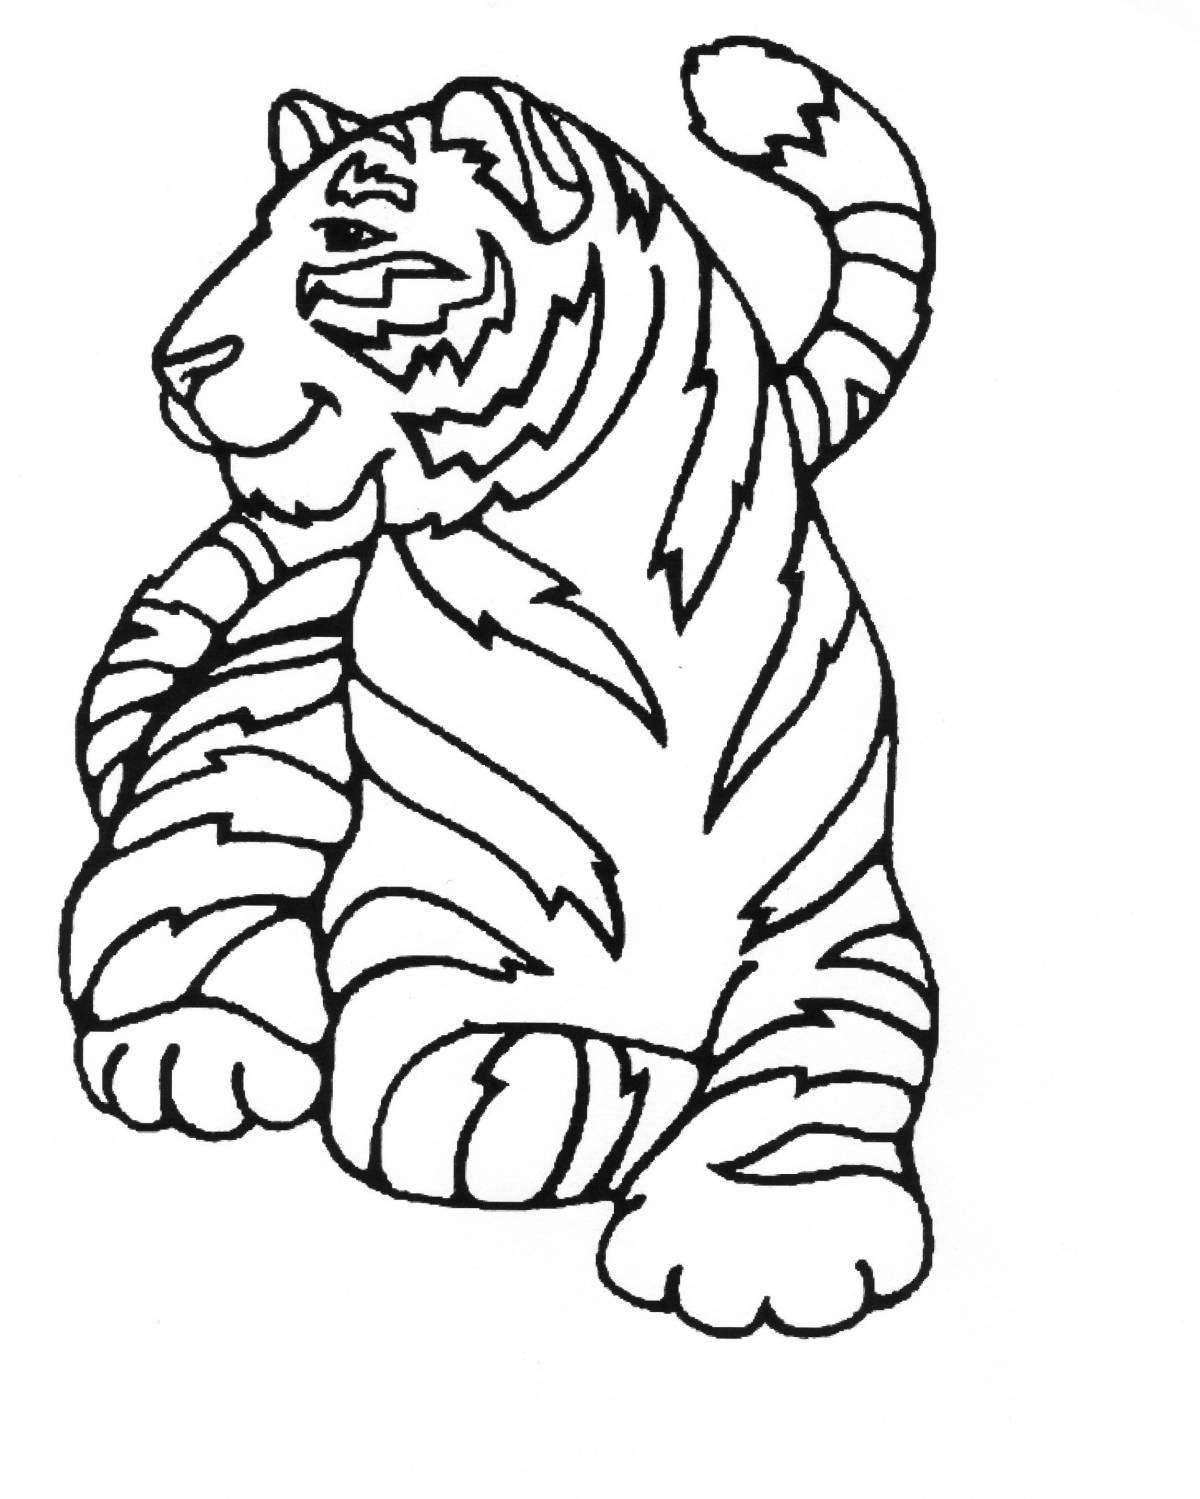 Tiger drawing for kids #2